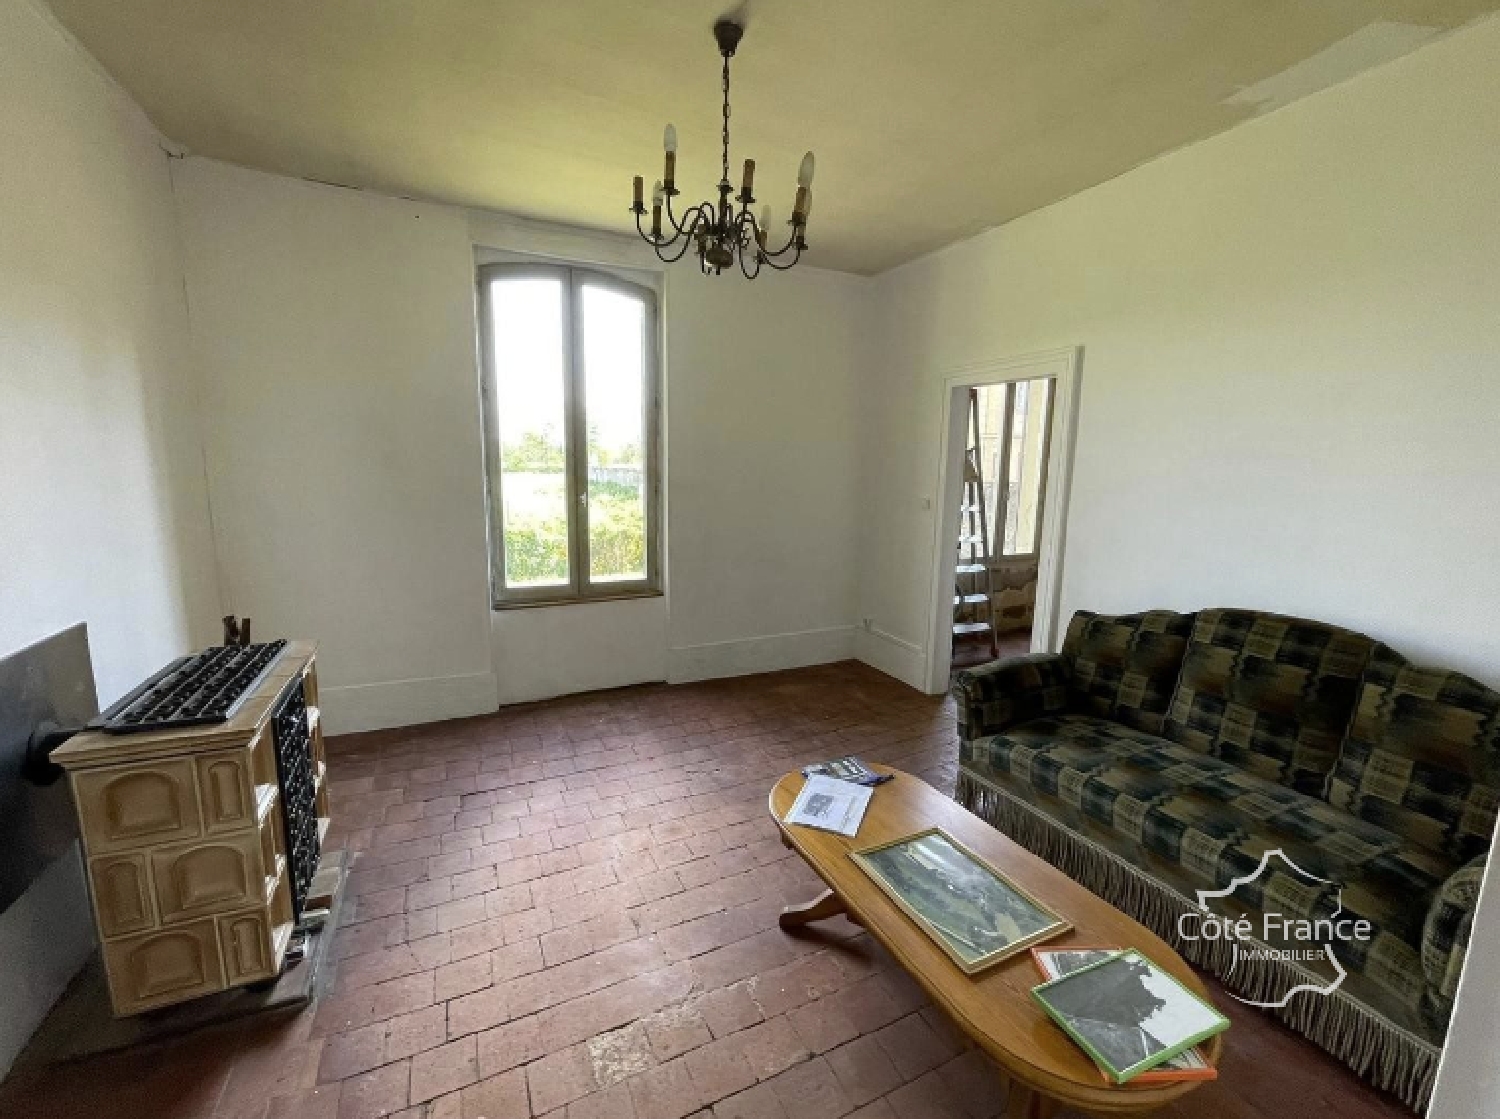  for sale villa Angely Yonne 7